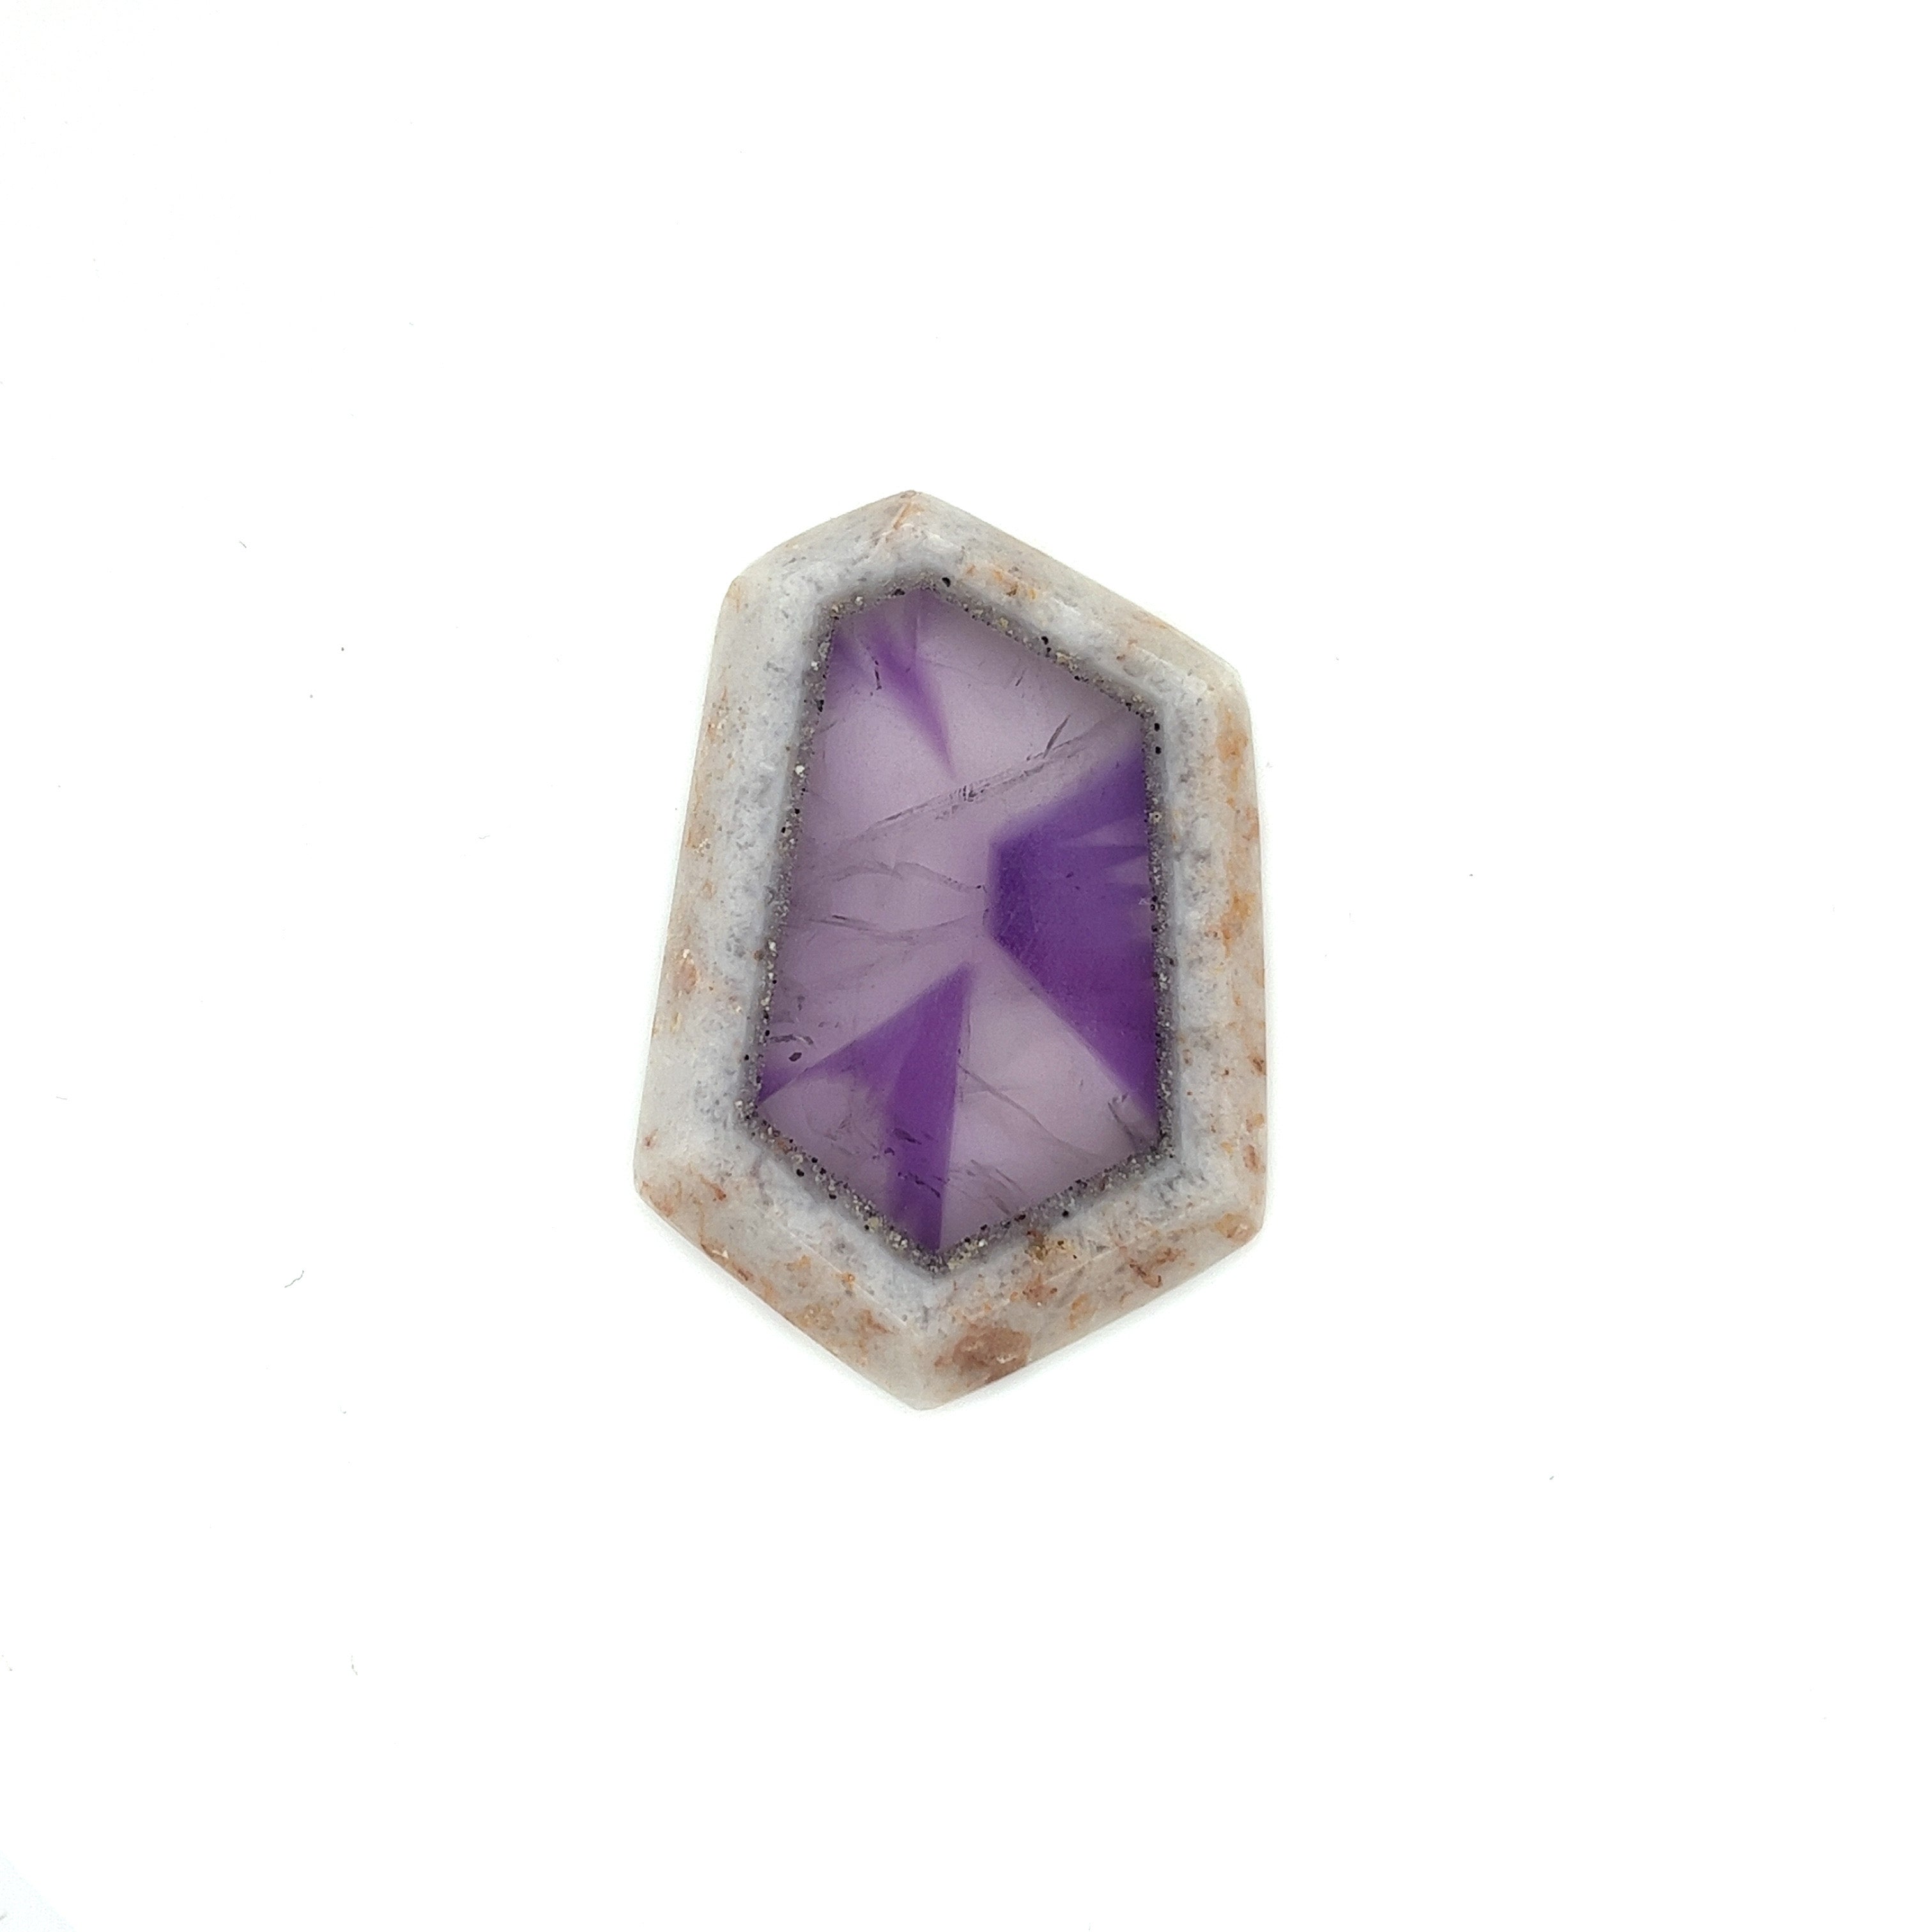 Trapiche Amethyst; Natural Untreated India Amethyst Slice, 14grams - Mark Oliver Gems